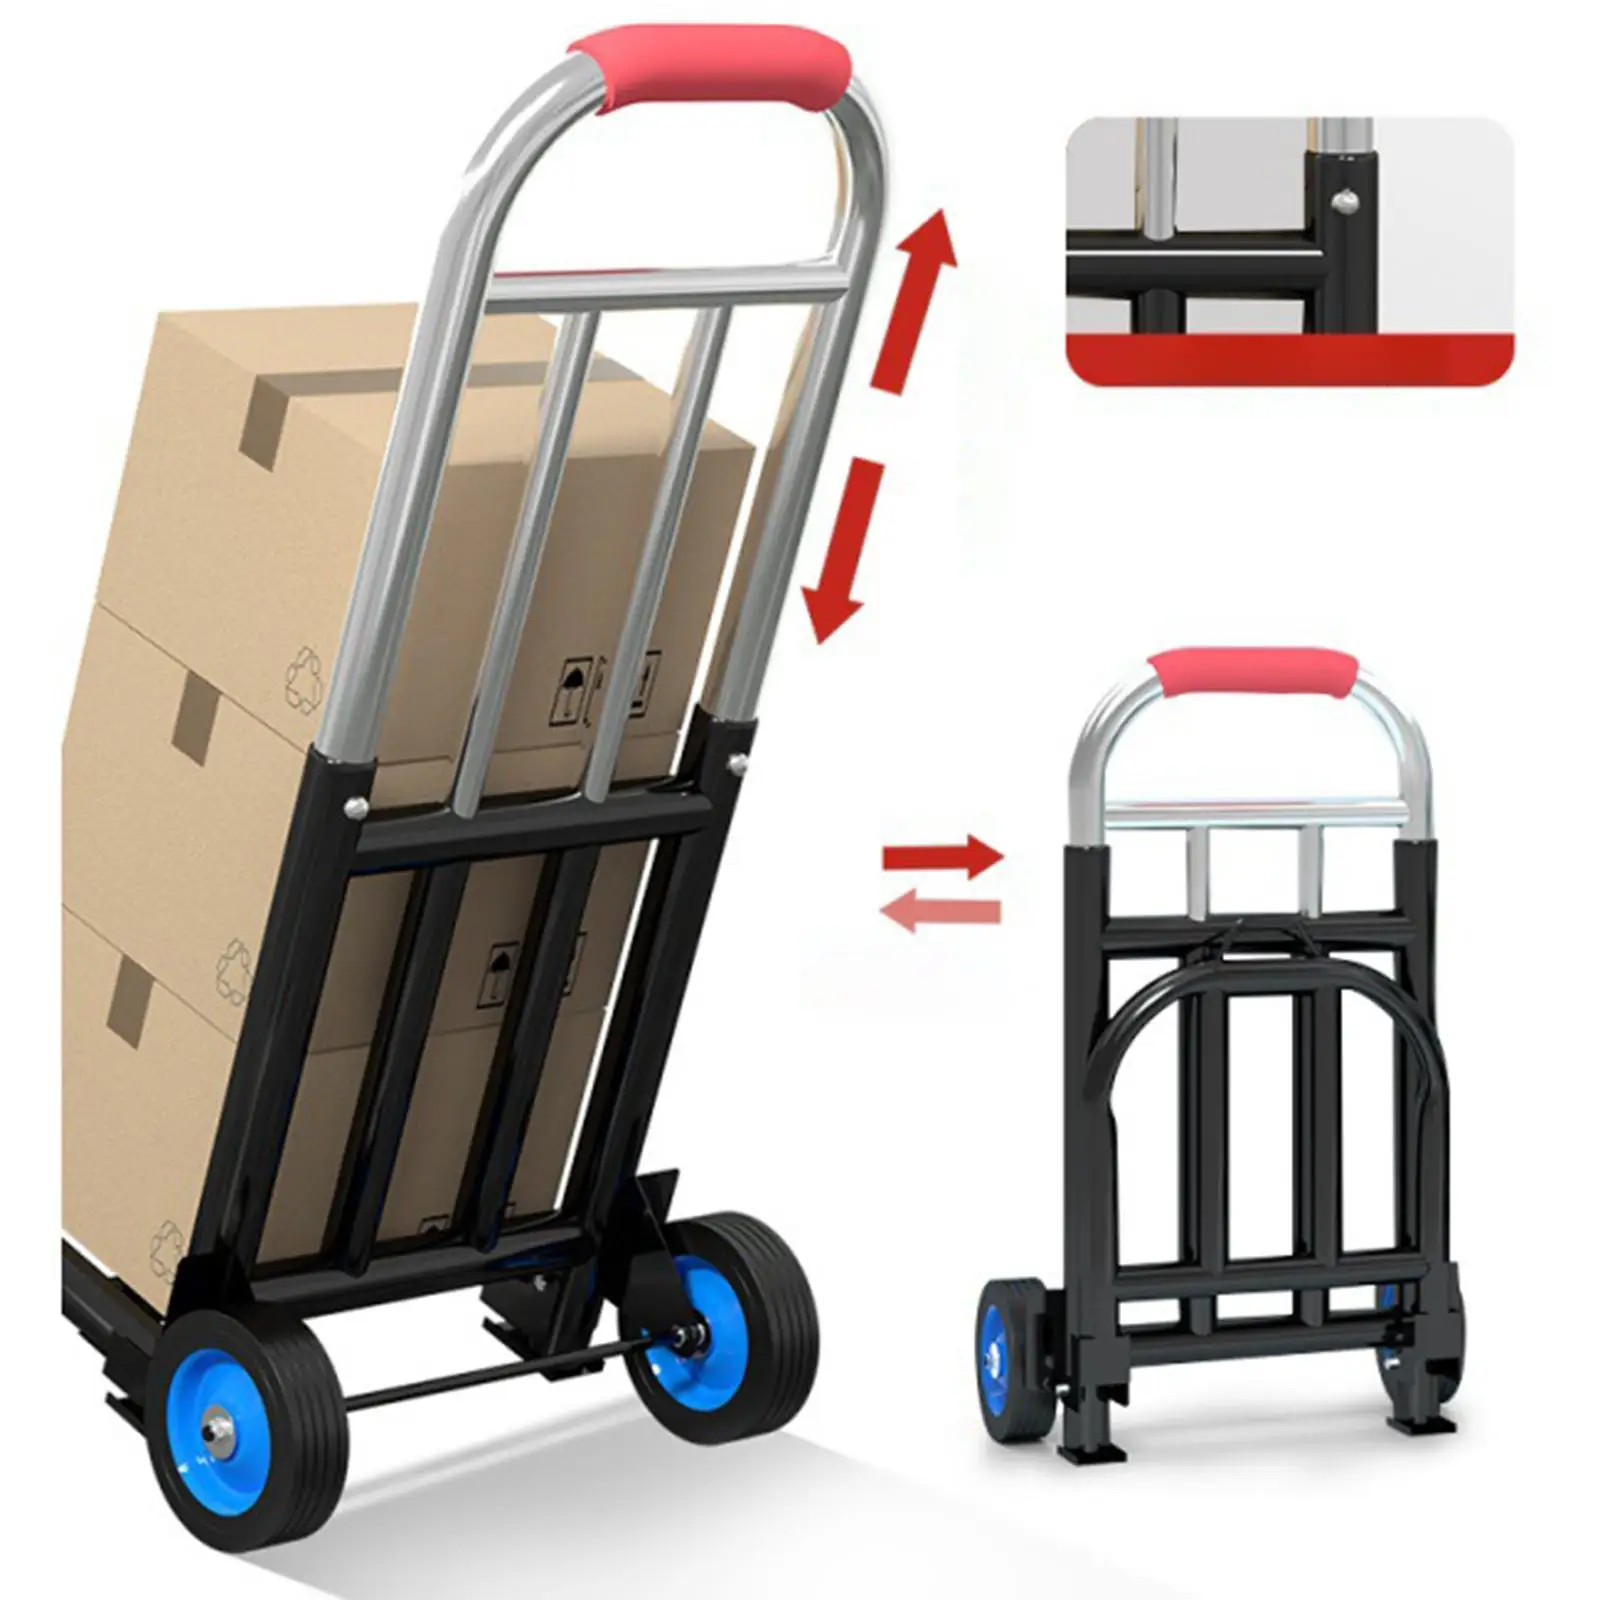 Foldable Hand Truck Luggage Hand Cart Telescopic 50cm-80cm Durable Easily Transport and Storage Metal Frame for Home Moving